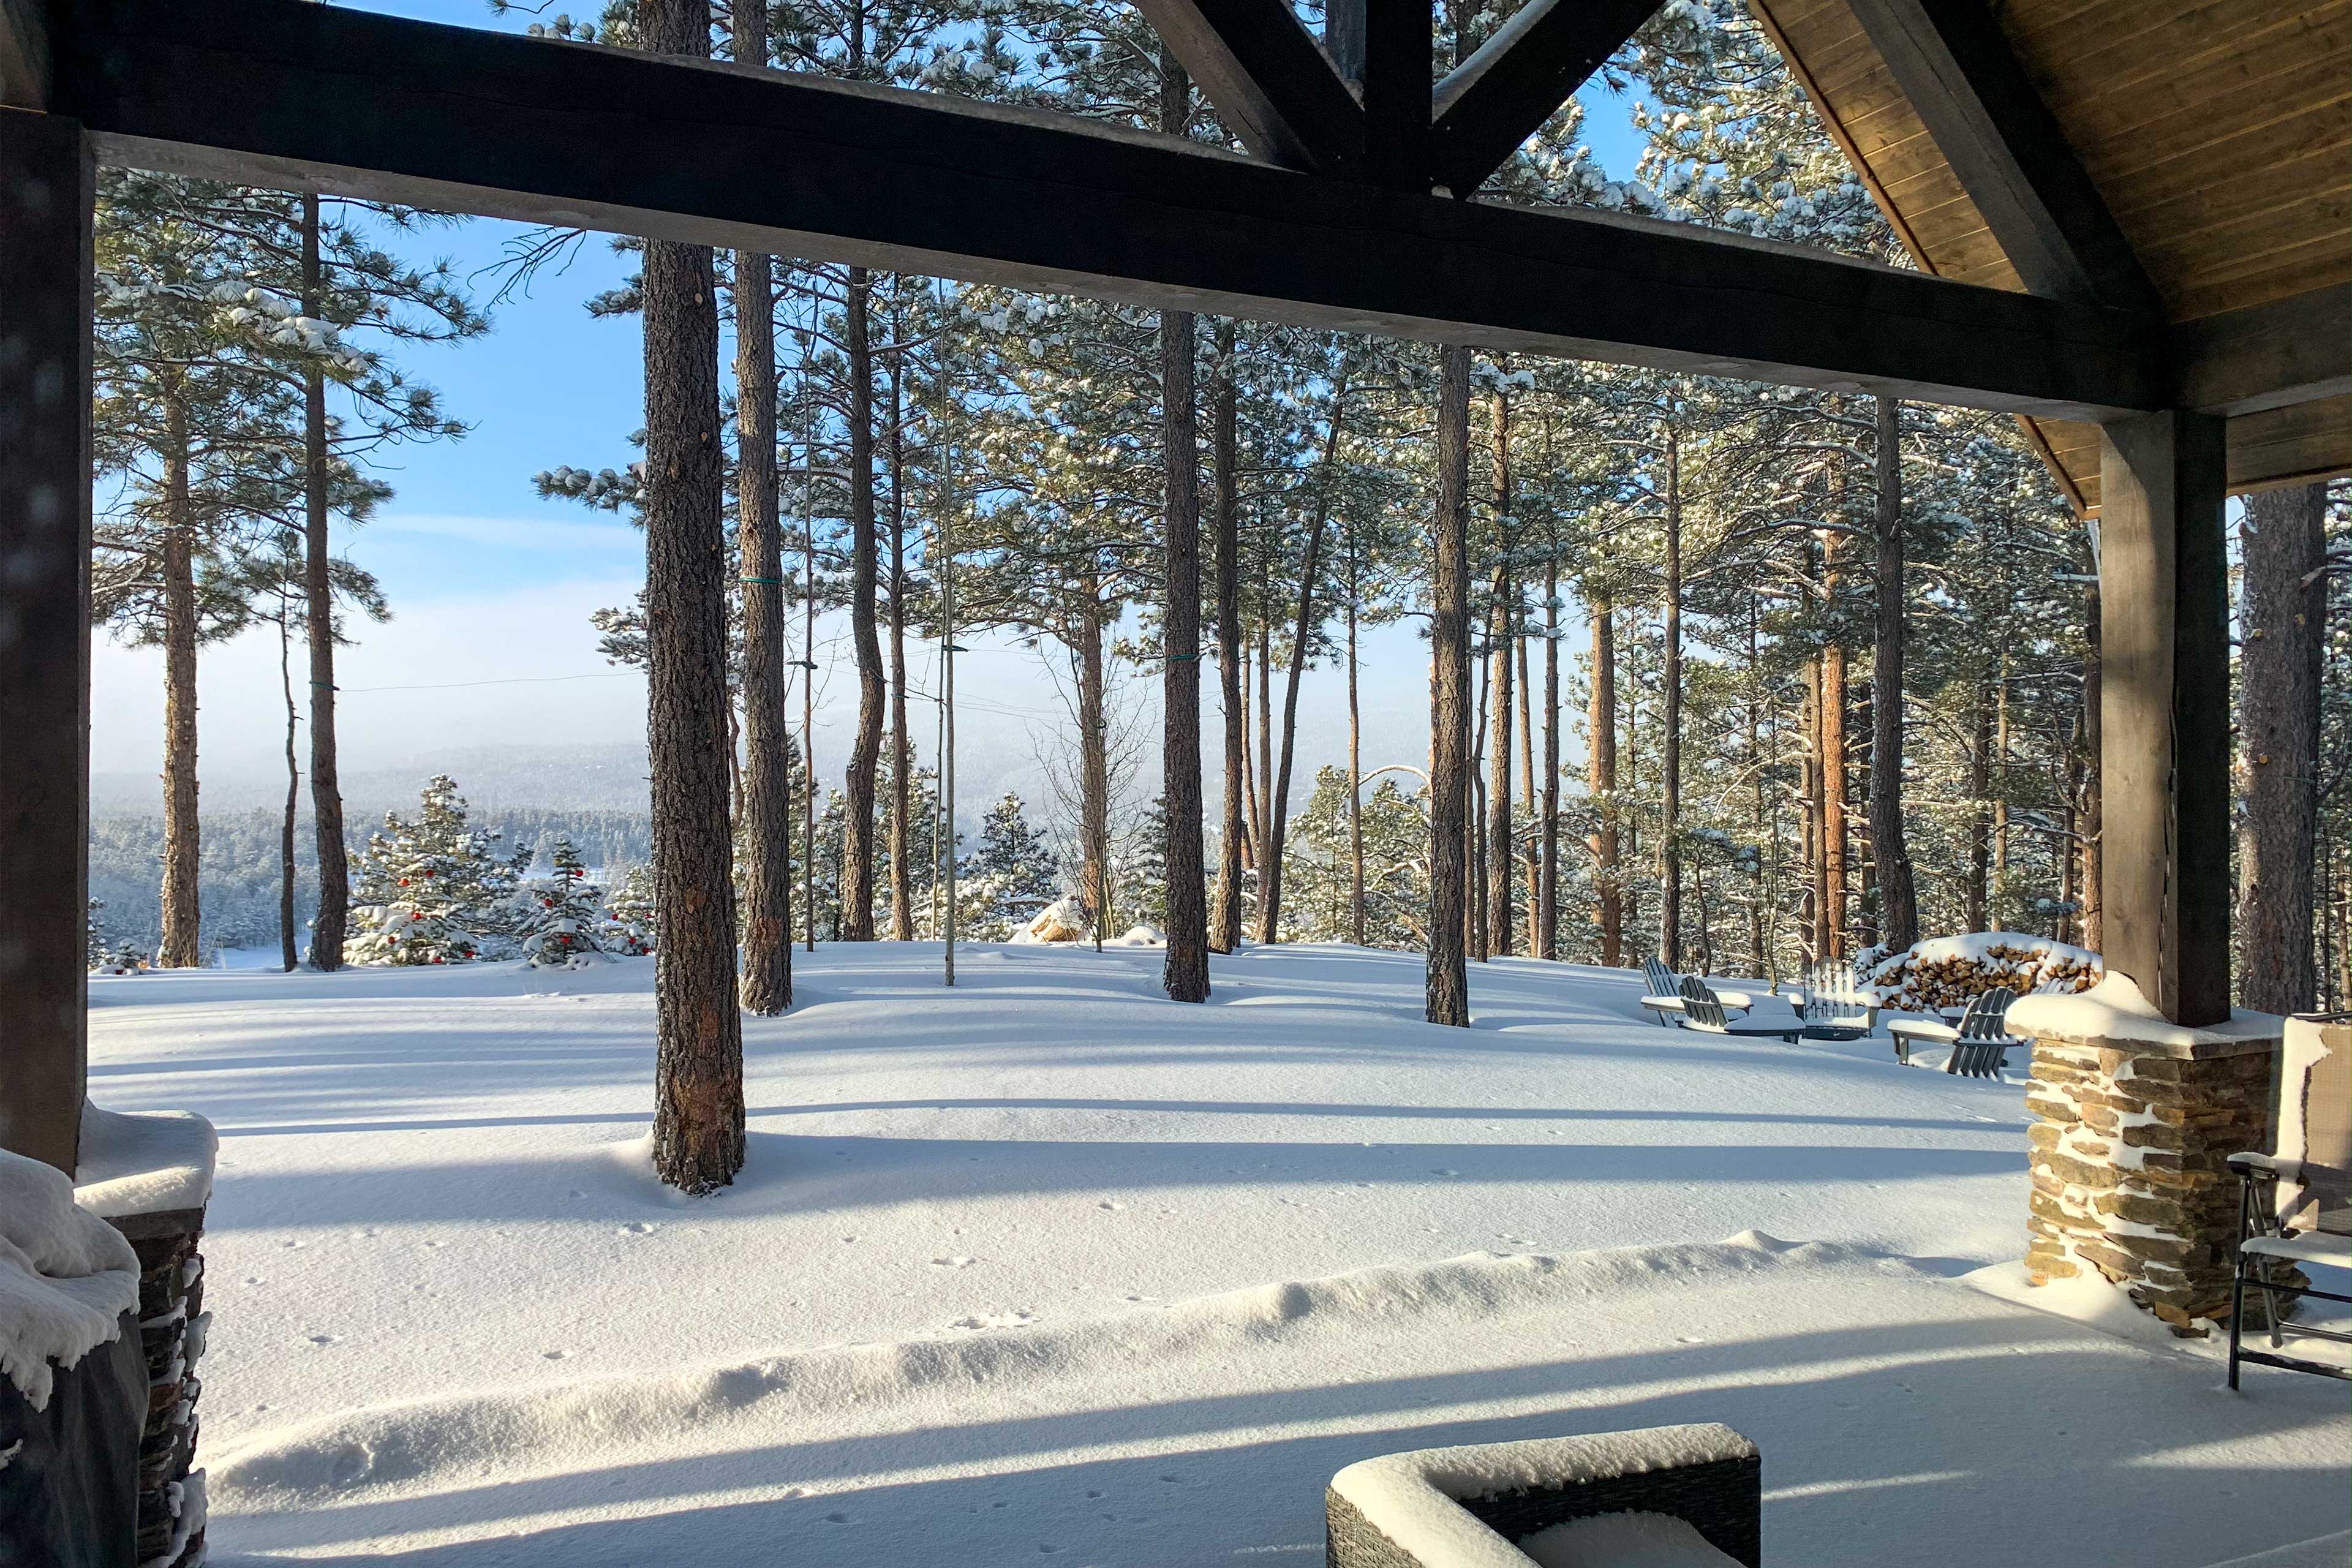 The entire cabin turns into a winter wonderland in the colder months.